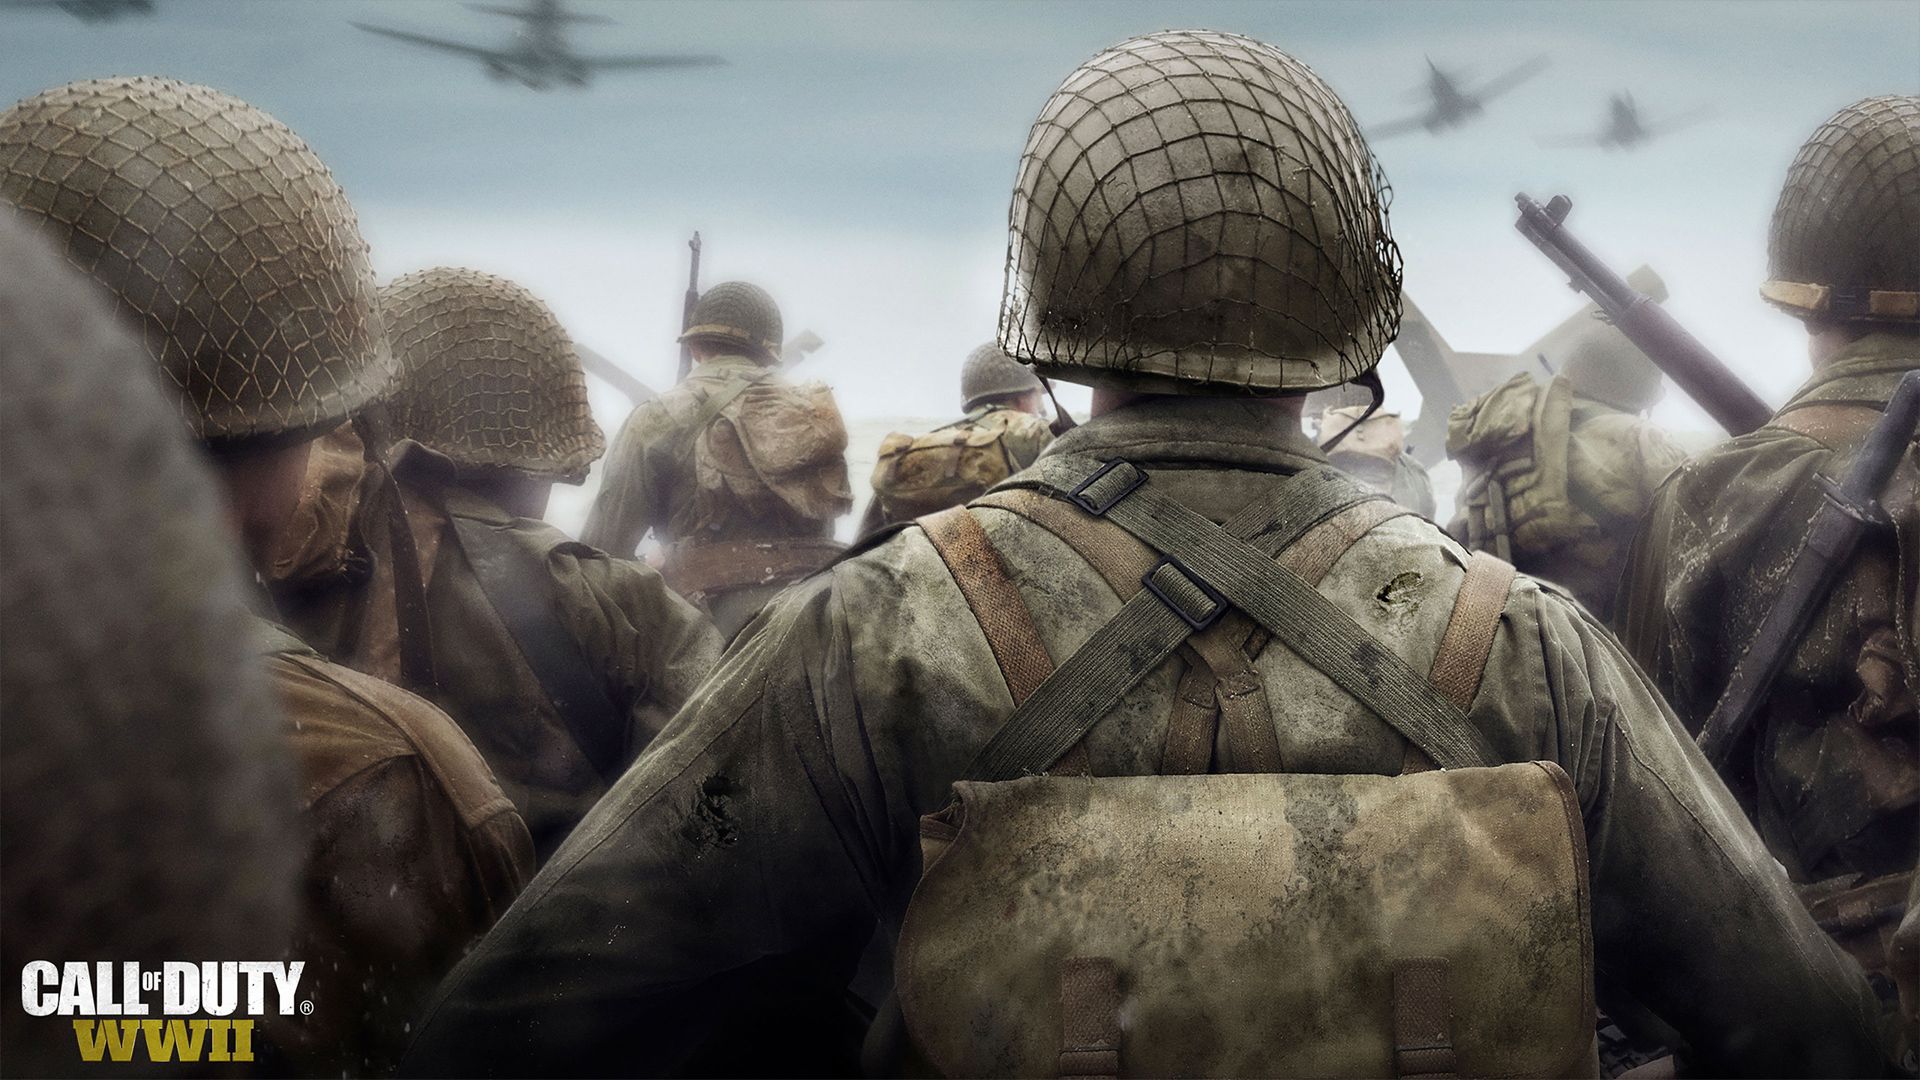 A moment before the landings on Omaha beach Wallpaper from Call